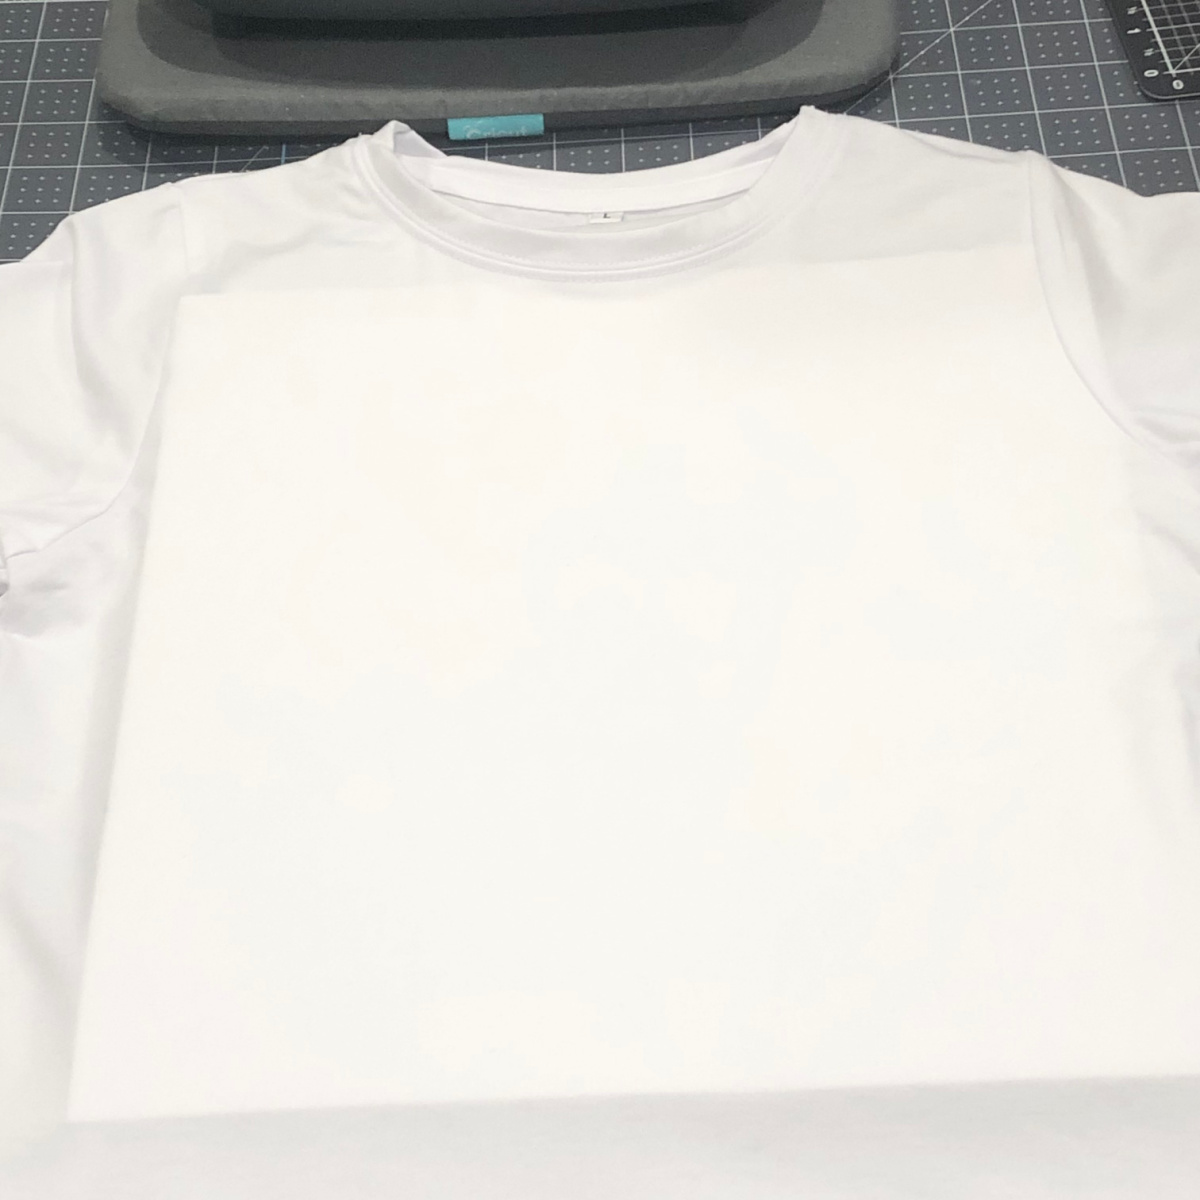 Cricut white sublimation t-shirt with 12X12 white cardstock inside shirt